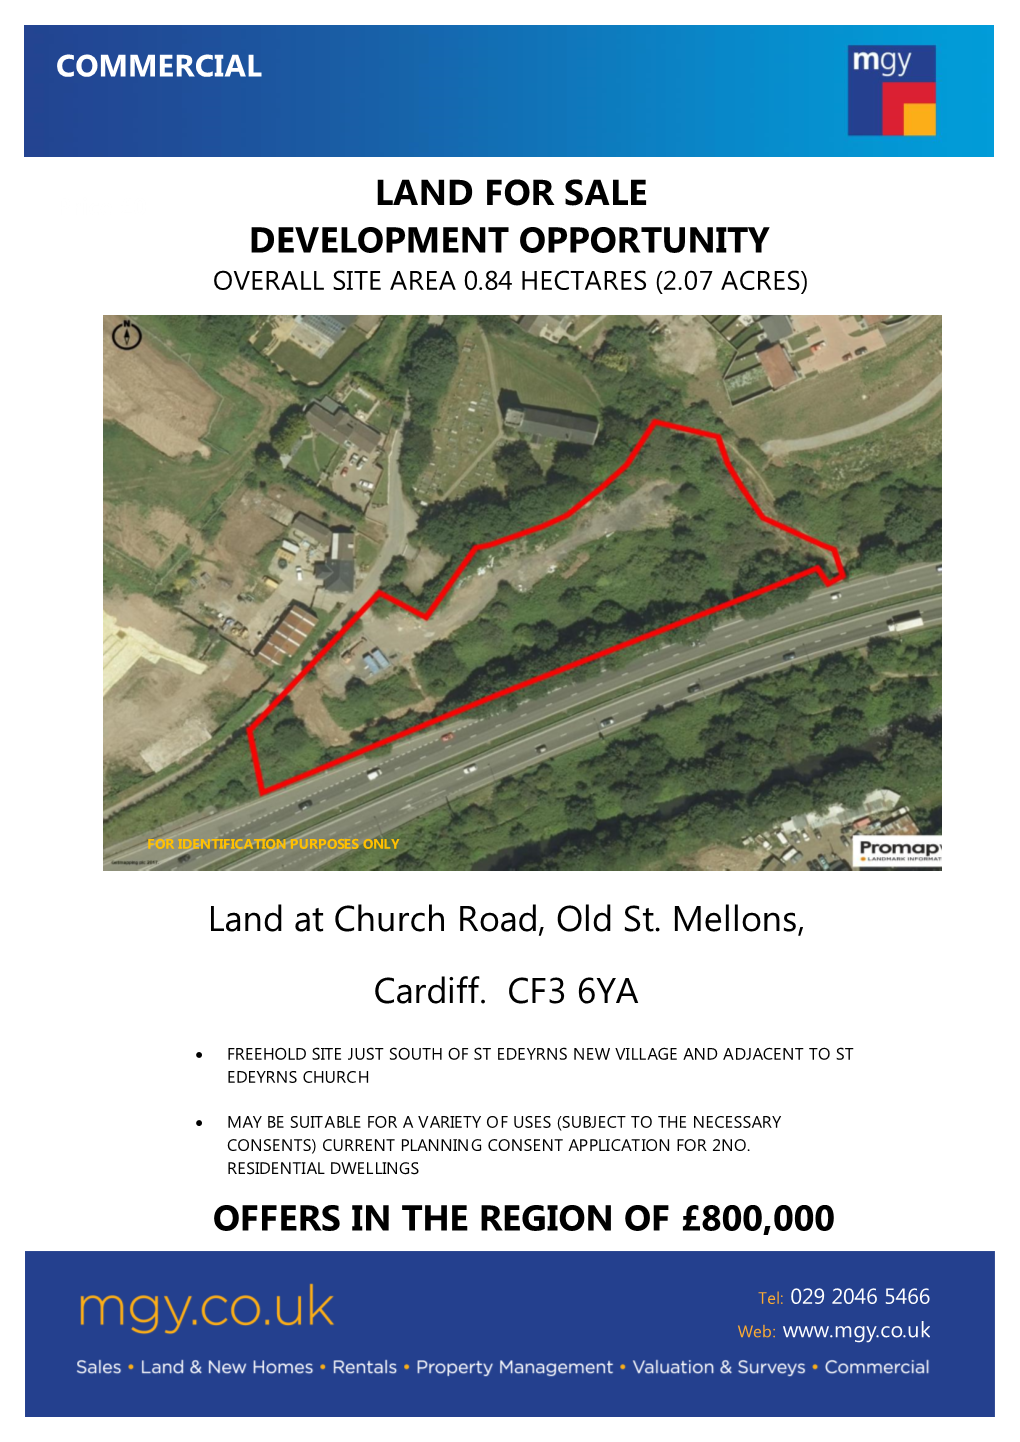 Land at Church Road, Old St. Mellons, Cardiff. CF3 6YA OFFERS